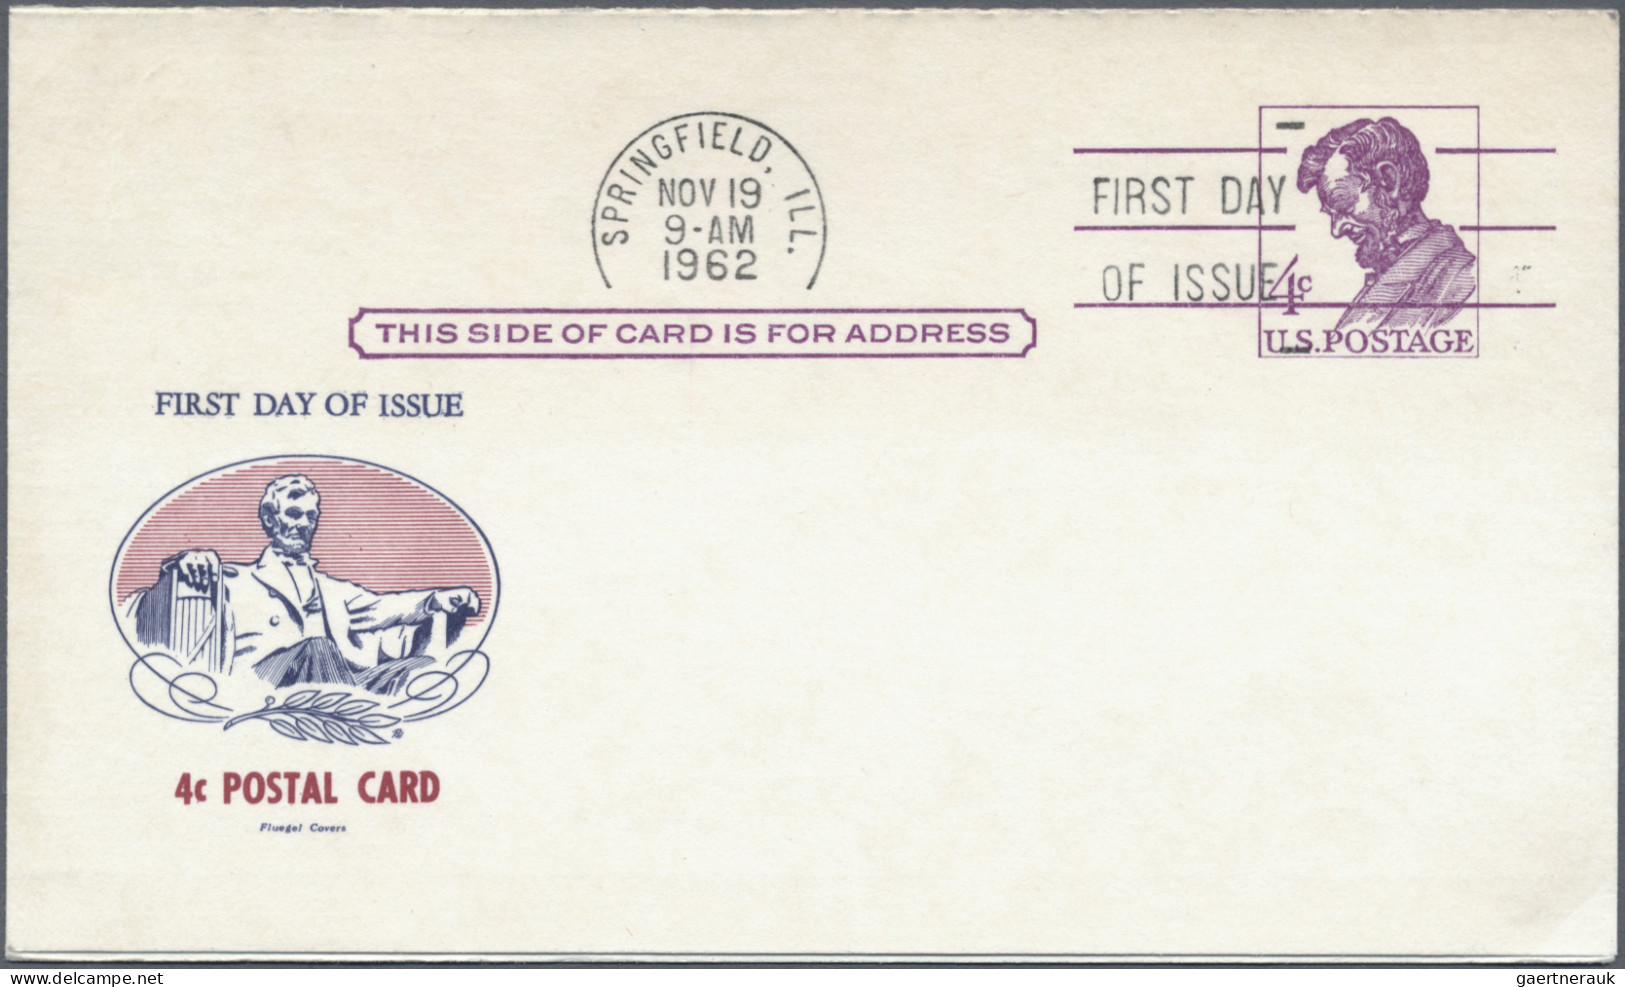 United States - Postal Stationary: 1951/1962, Postal Cards with IMPRINT (CACHET)